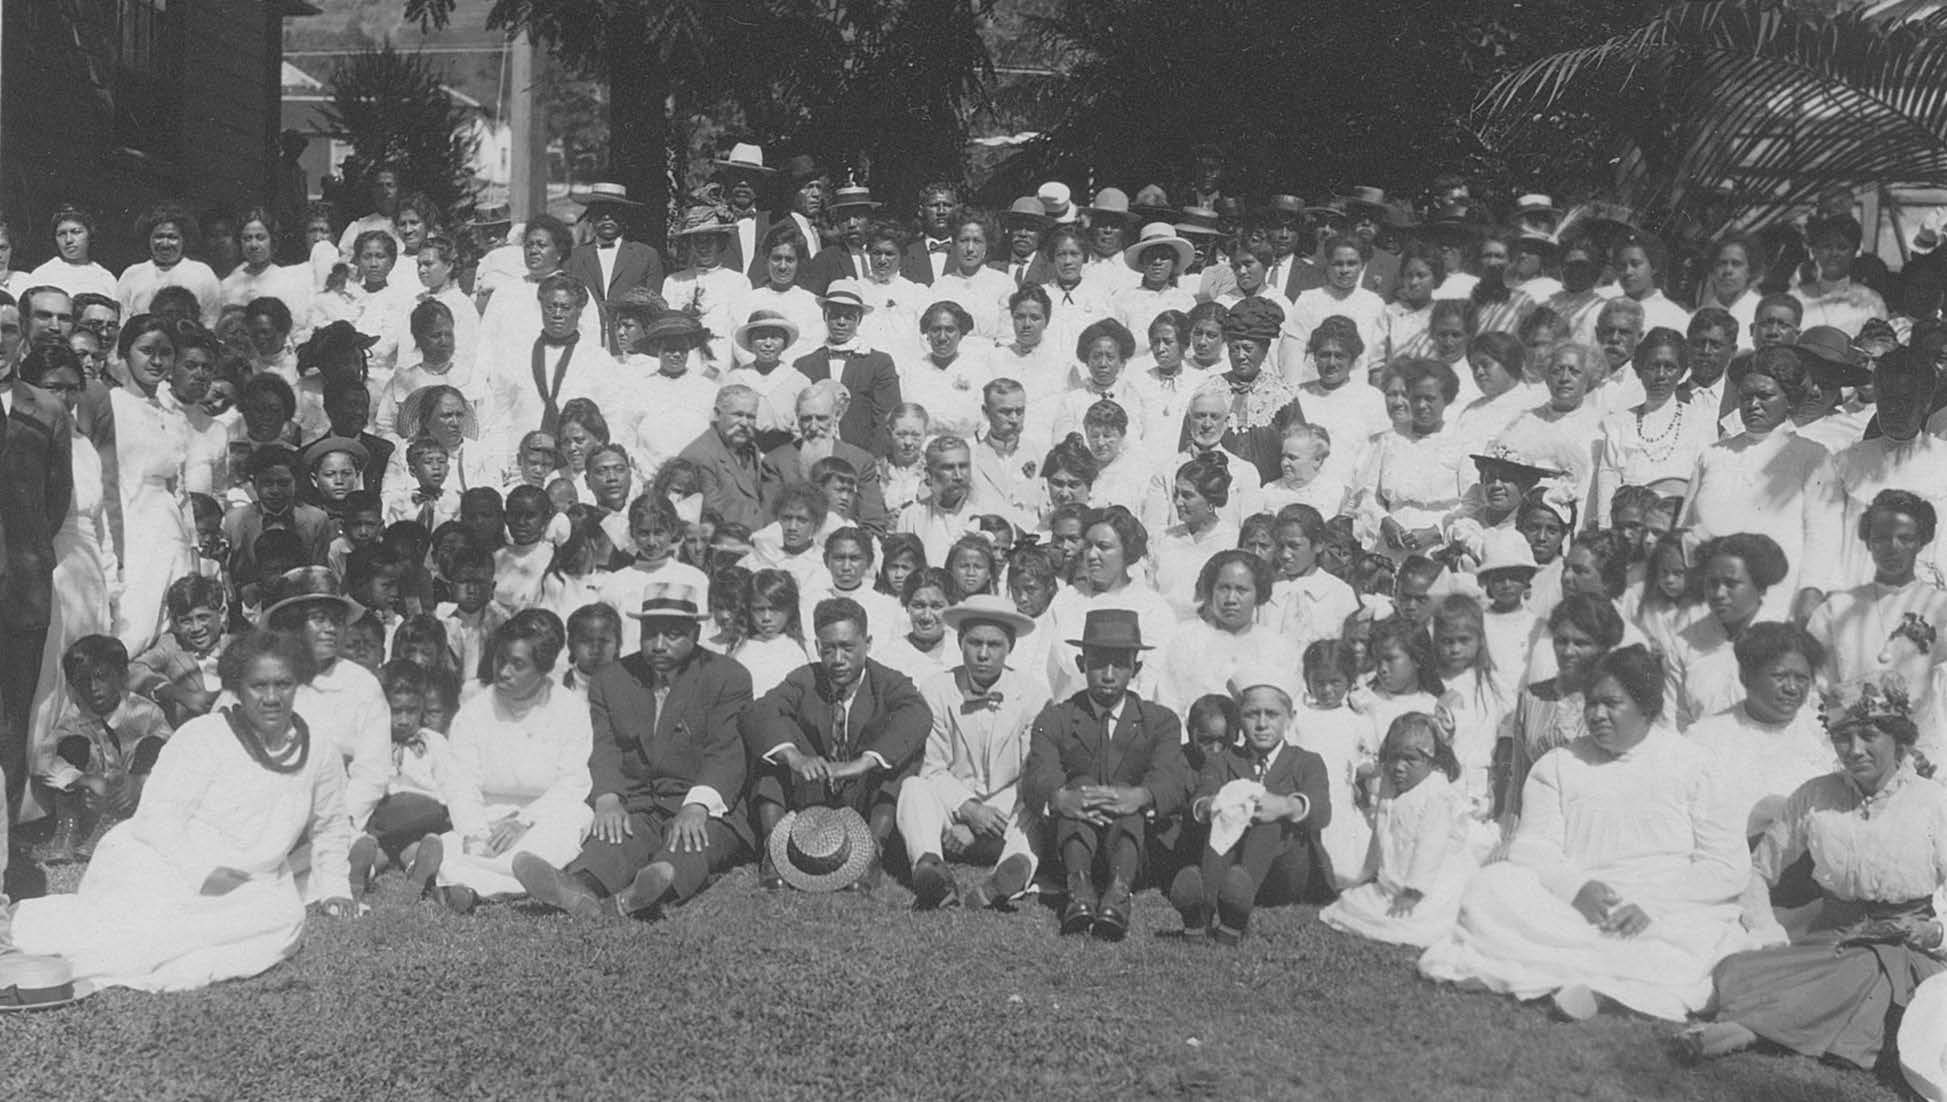 During his 1915 visit to Hawaiʻi, the prophet noted significant temporal progress and extolled the spiritual strength of the island Saints. President Smith (at center), with traveling party to the right and Samuel E. Woolley to the left. Courtesy of Church History Library.